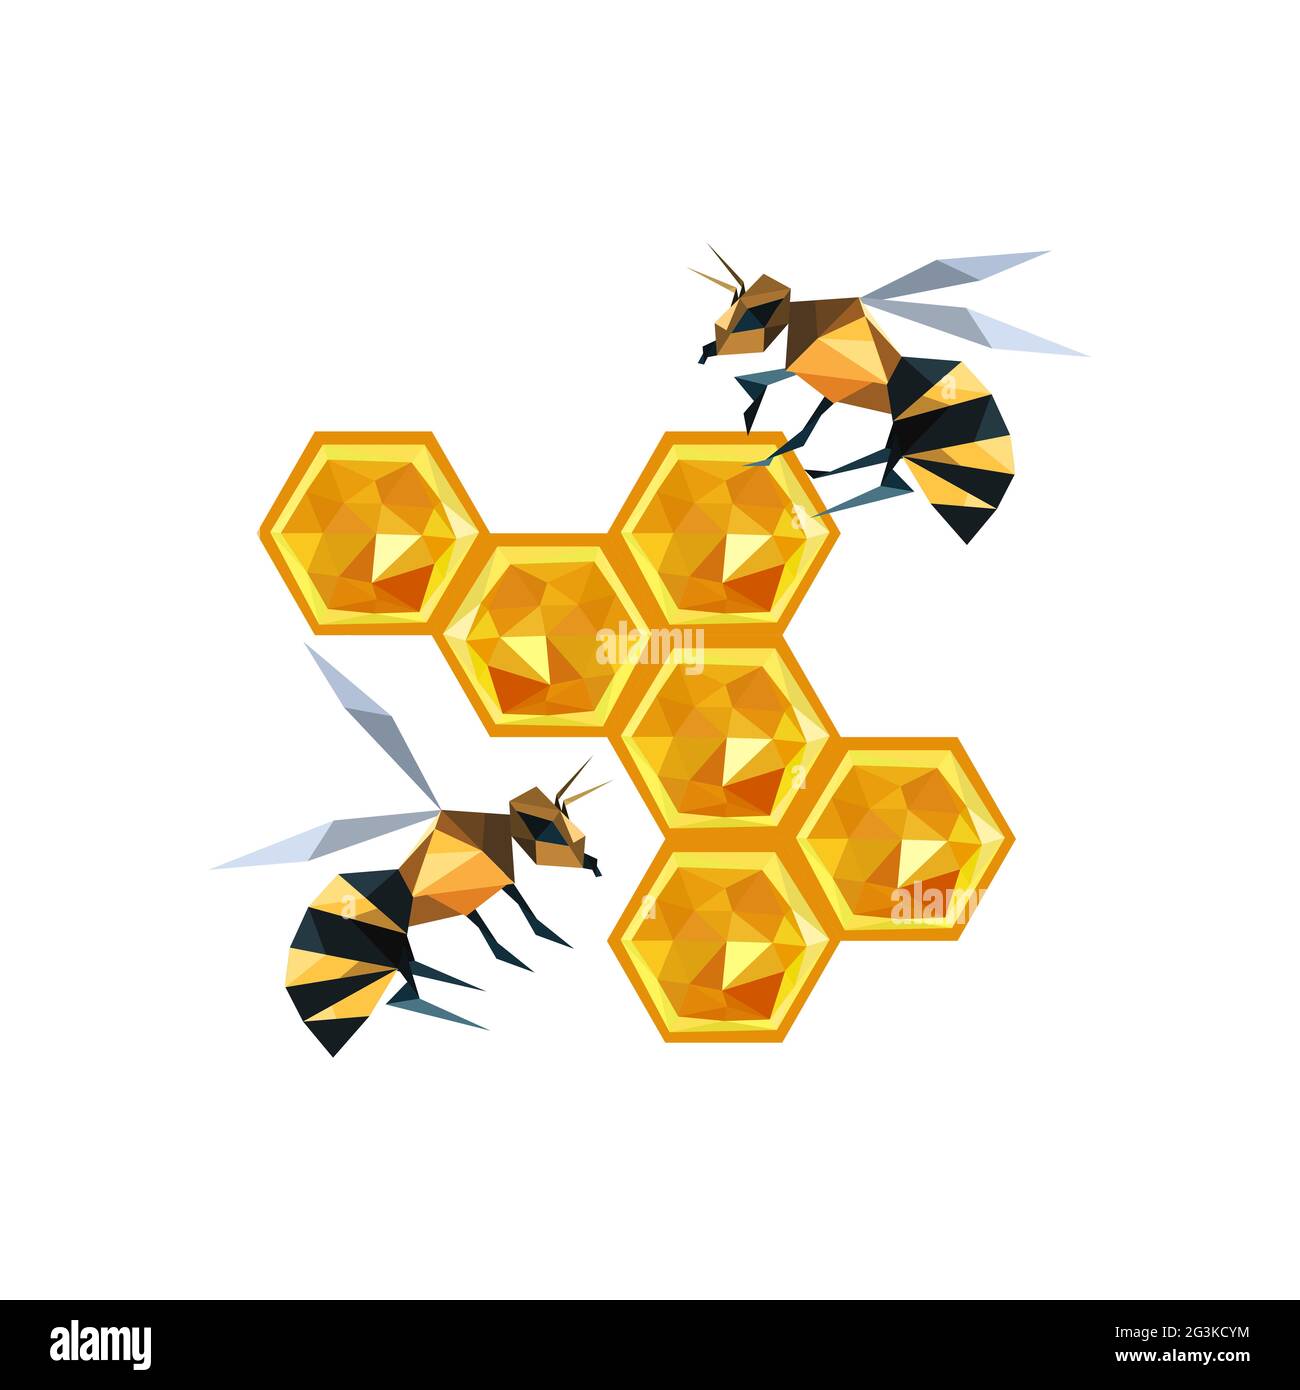 Illustration of origami honeycomb with bees Stock Photo